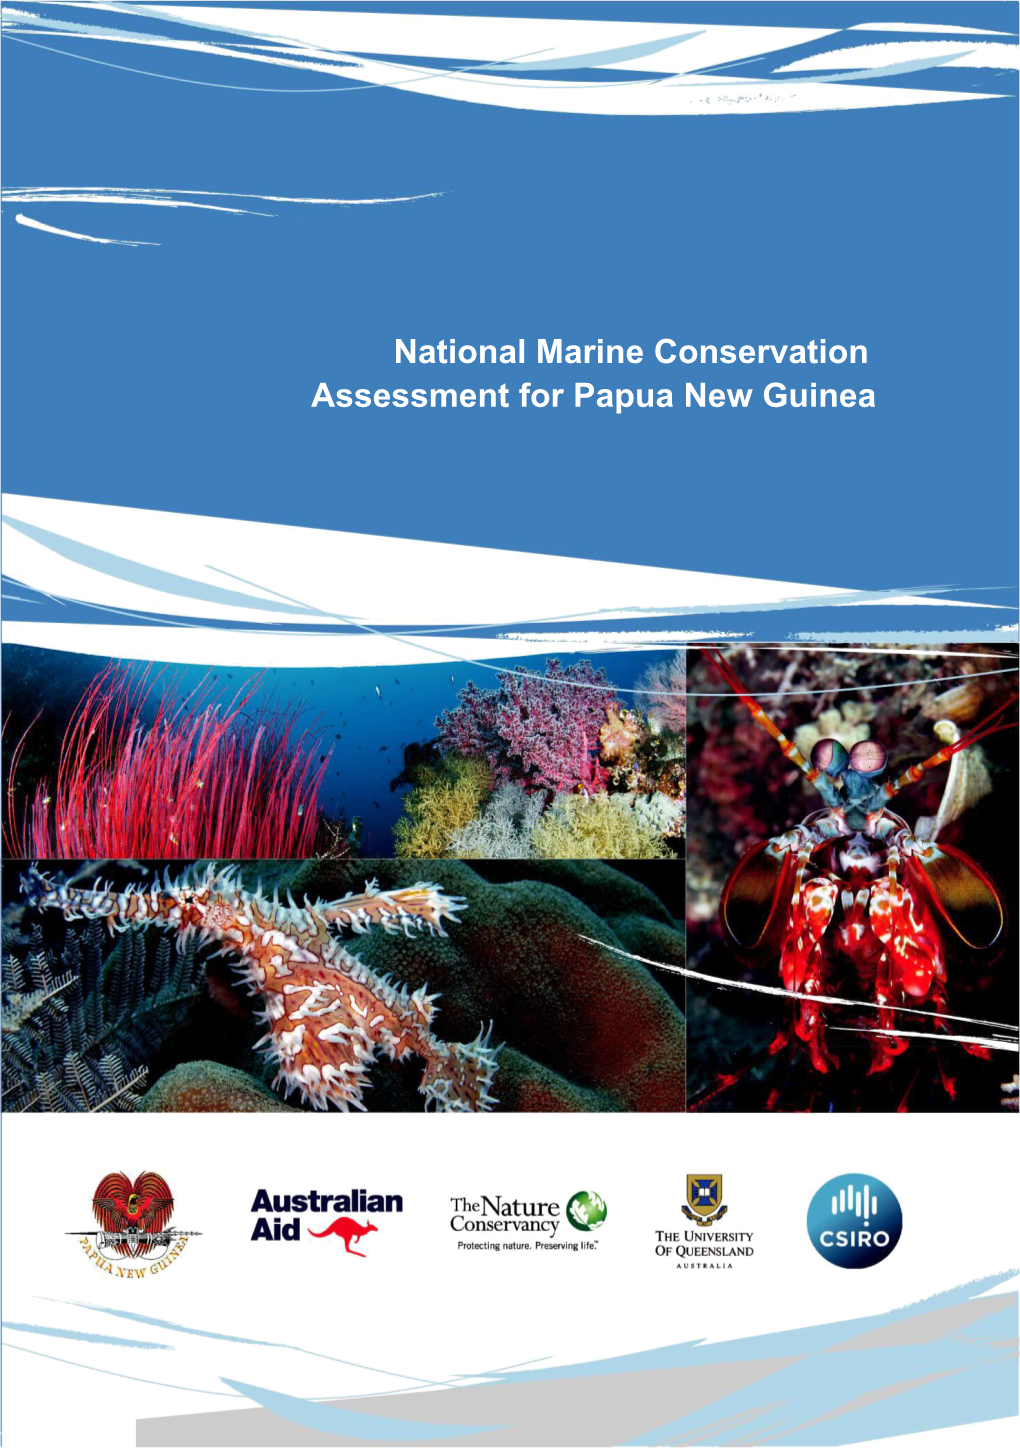 National Marine Conservation Assessment for Papua New Guinea